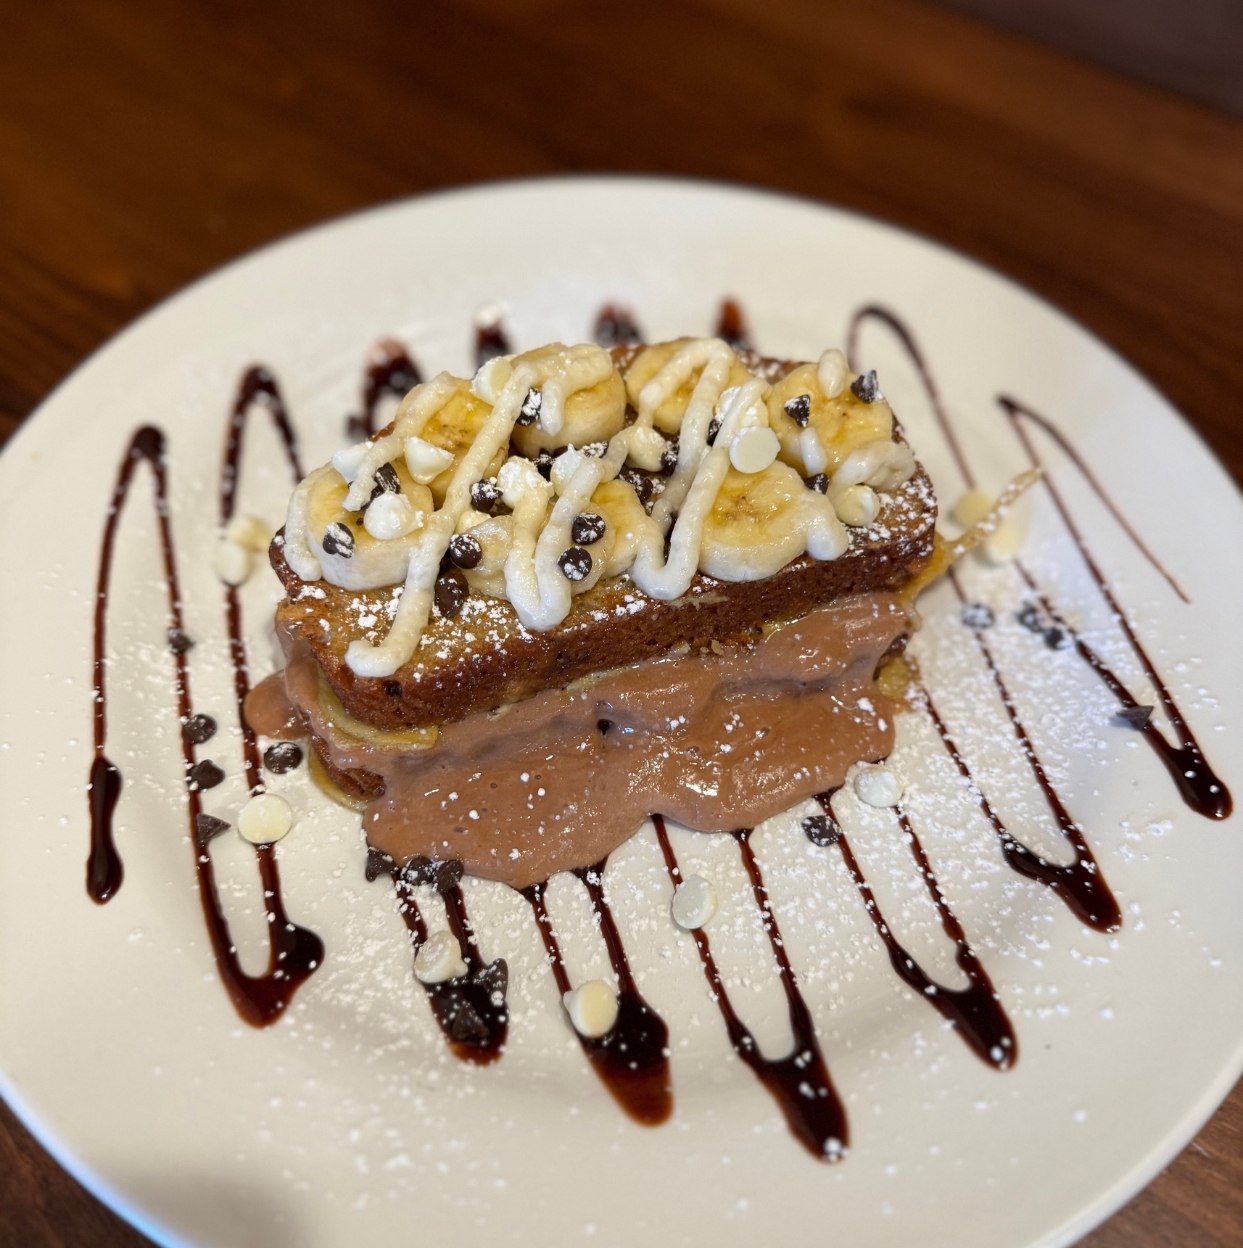 Chocolate stuffed banana french toast-June specials at brunch cafe